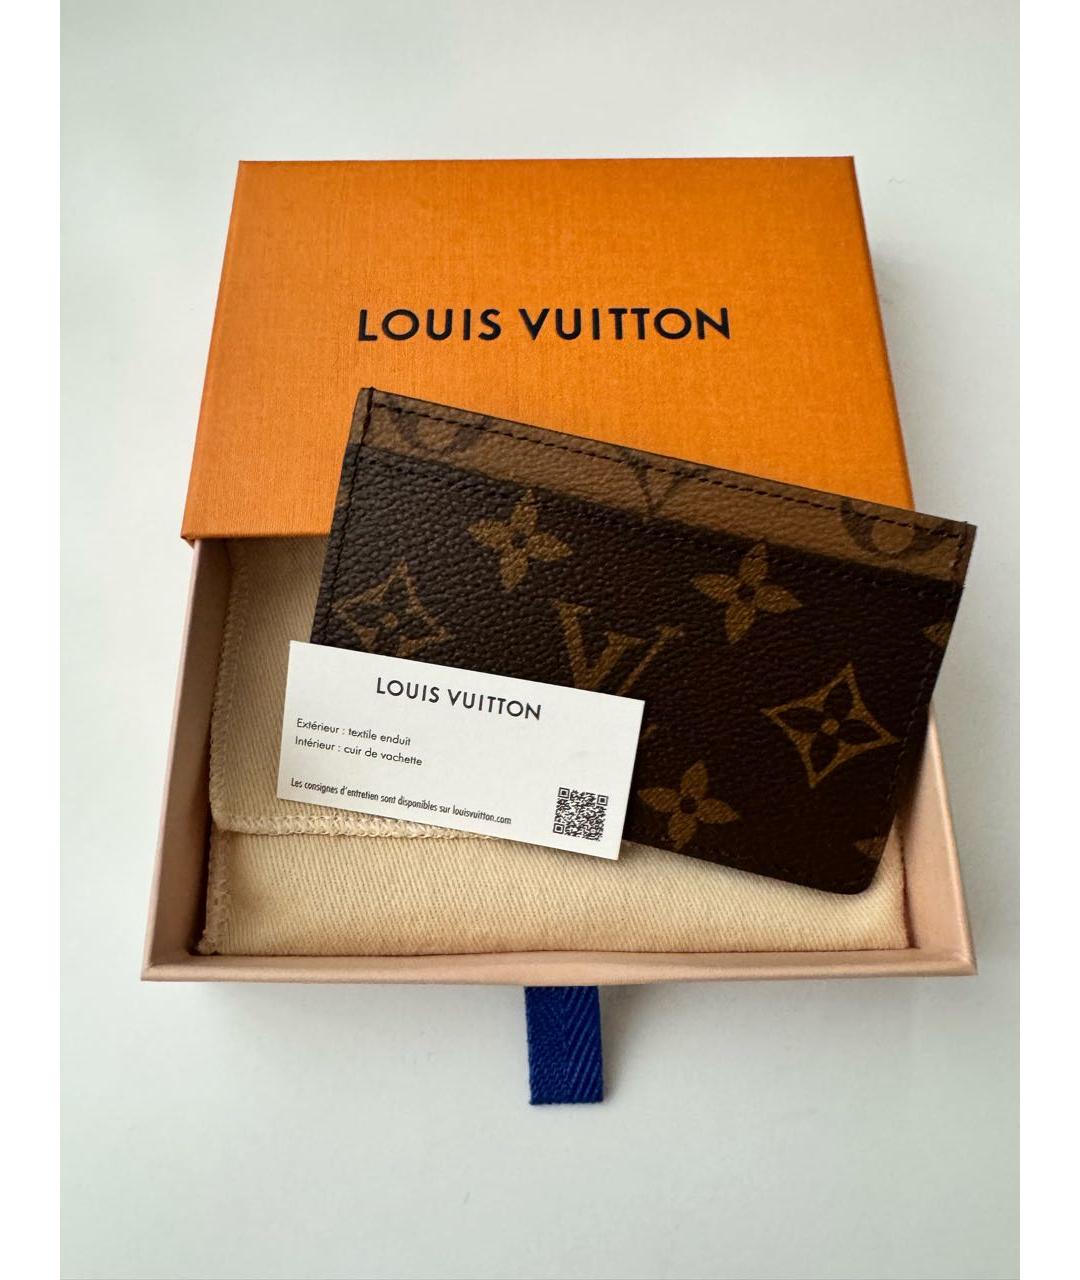 LOUIS VUITTON PRE-OWNED Коричневый кардхолдер, фото 3